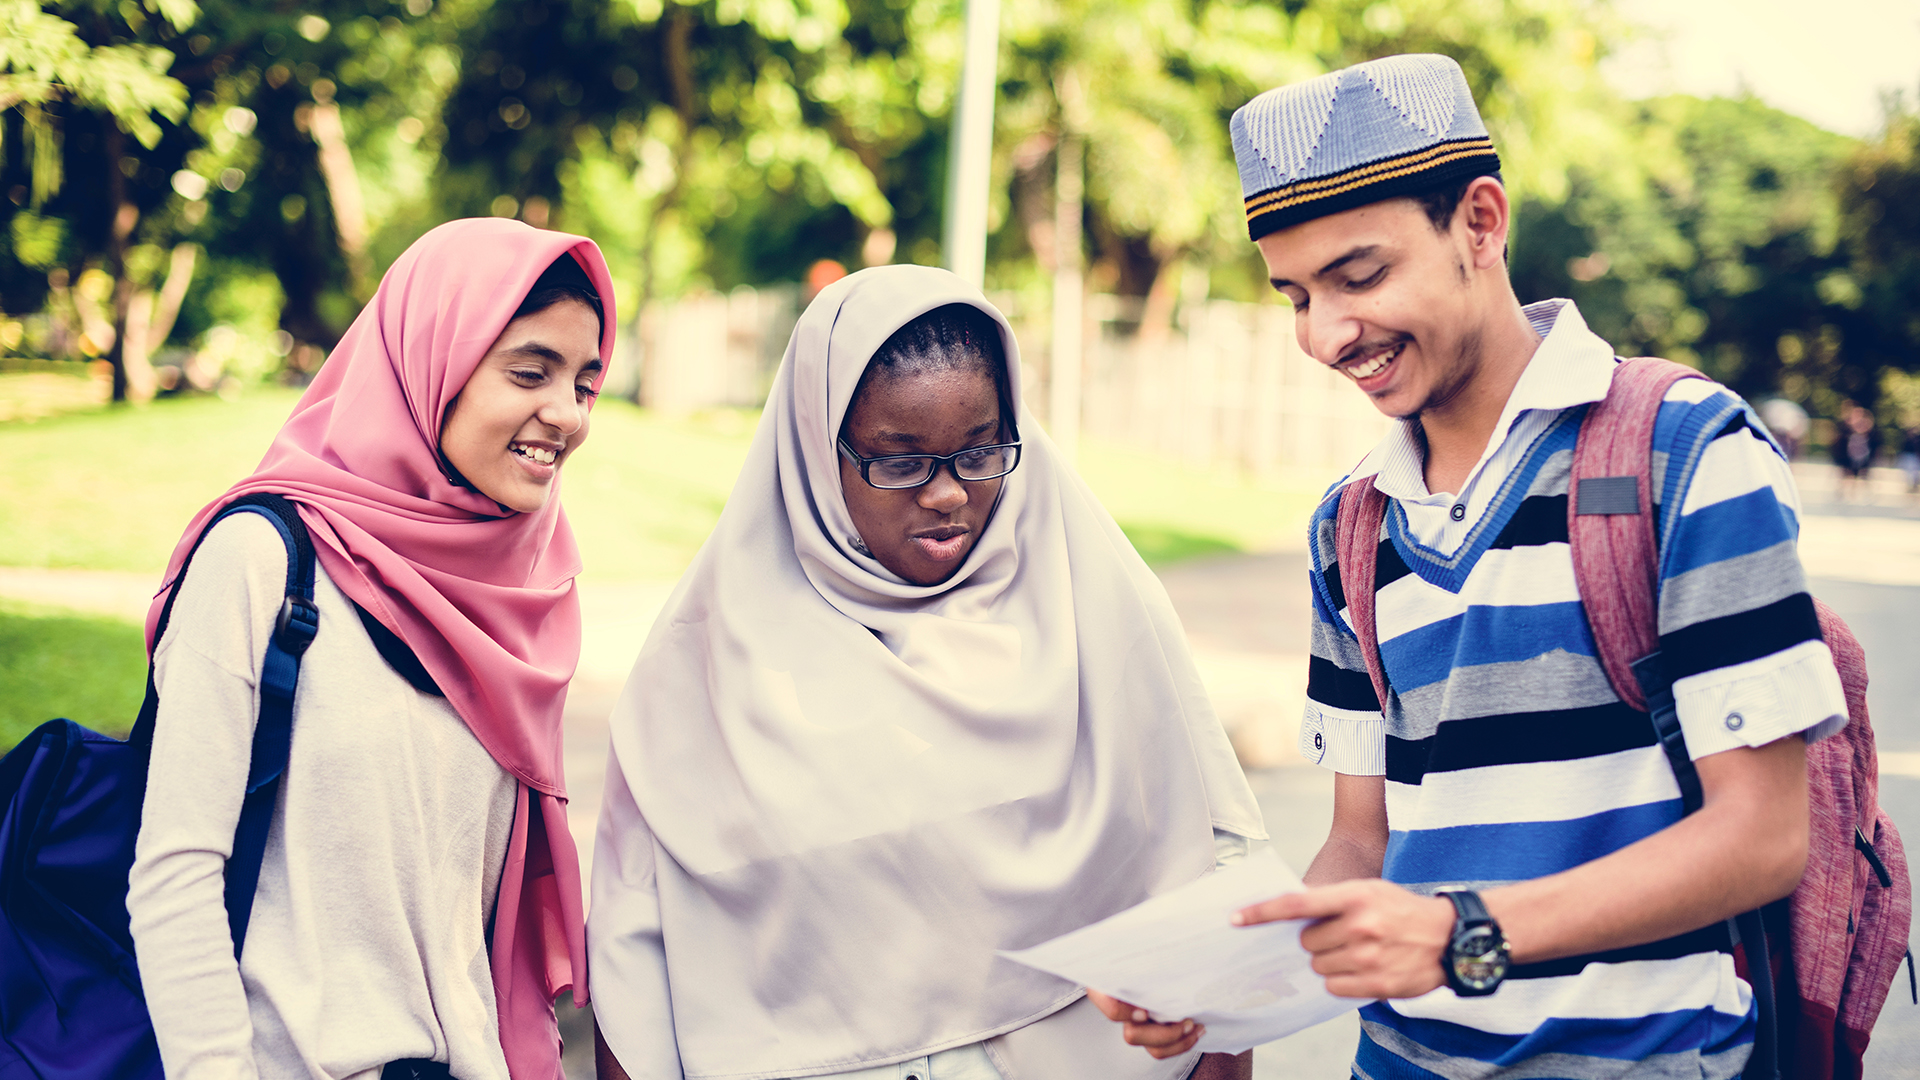 Photo of diverse group of two young women wearing headscarves and a young man wearing a hat looking at a paper.